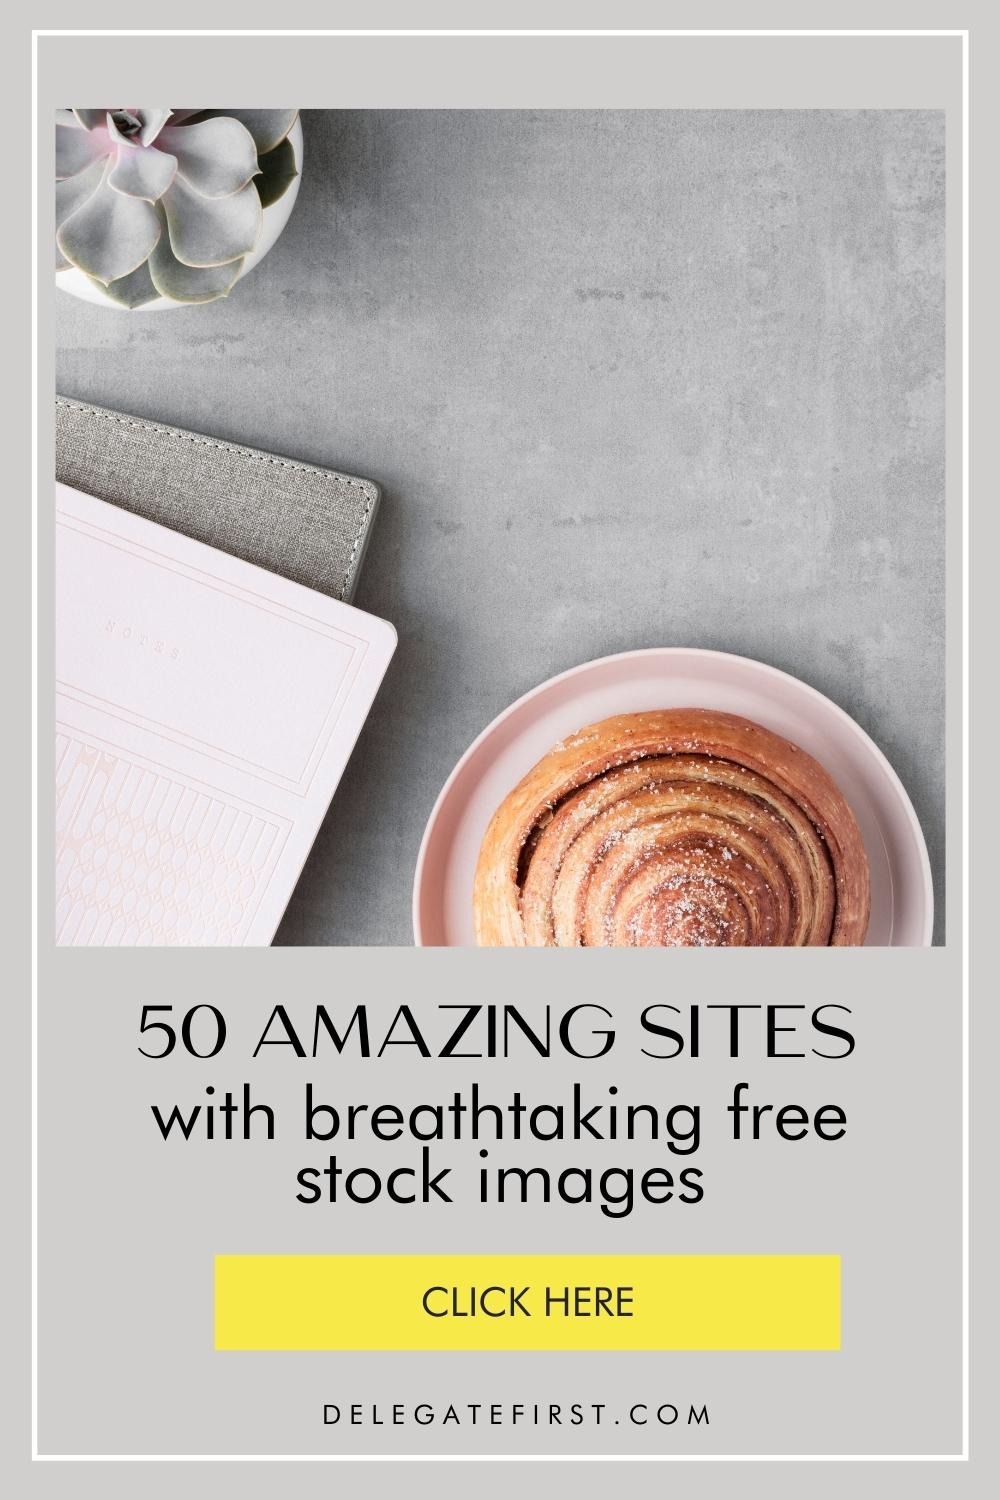 50 Amazing sites with breathtaking free stock images for small businesses